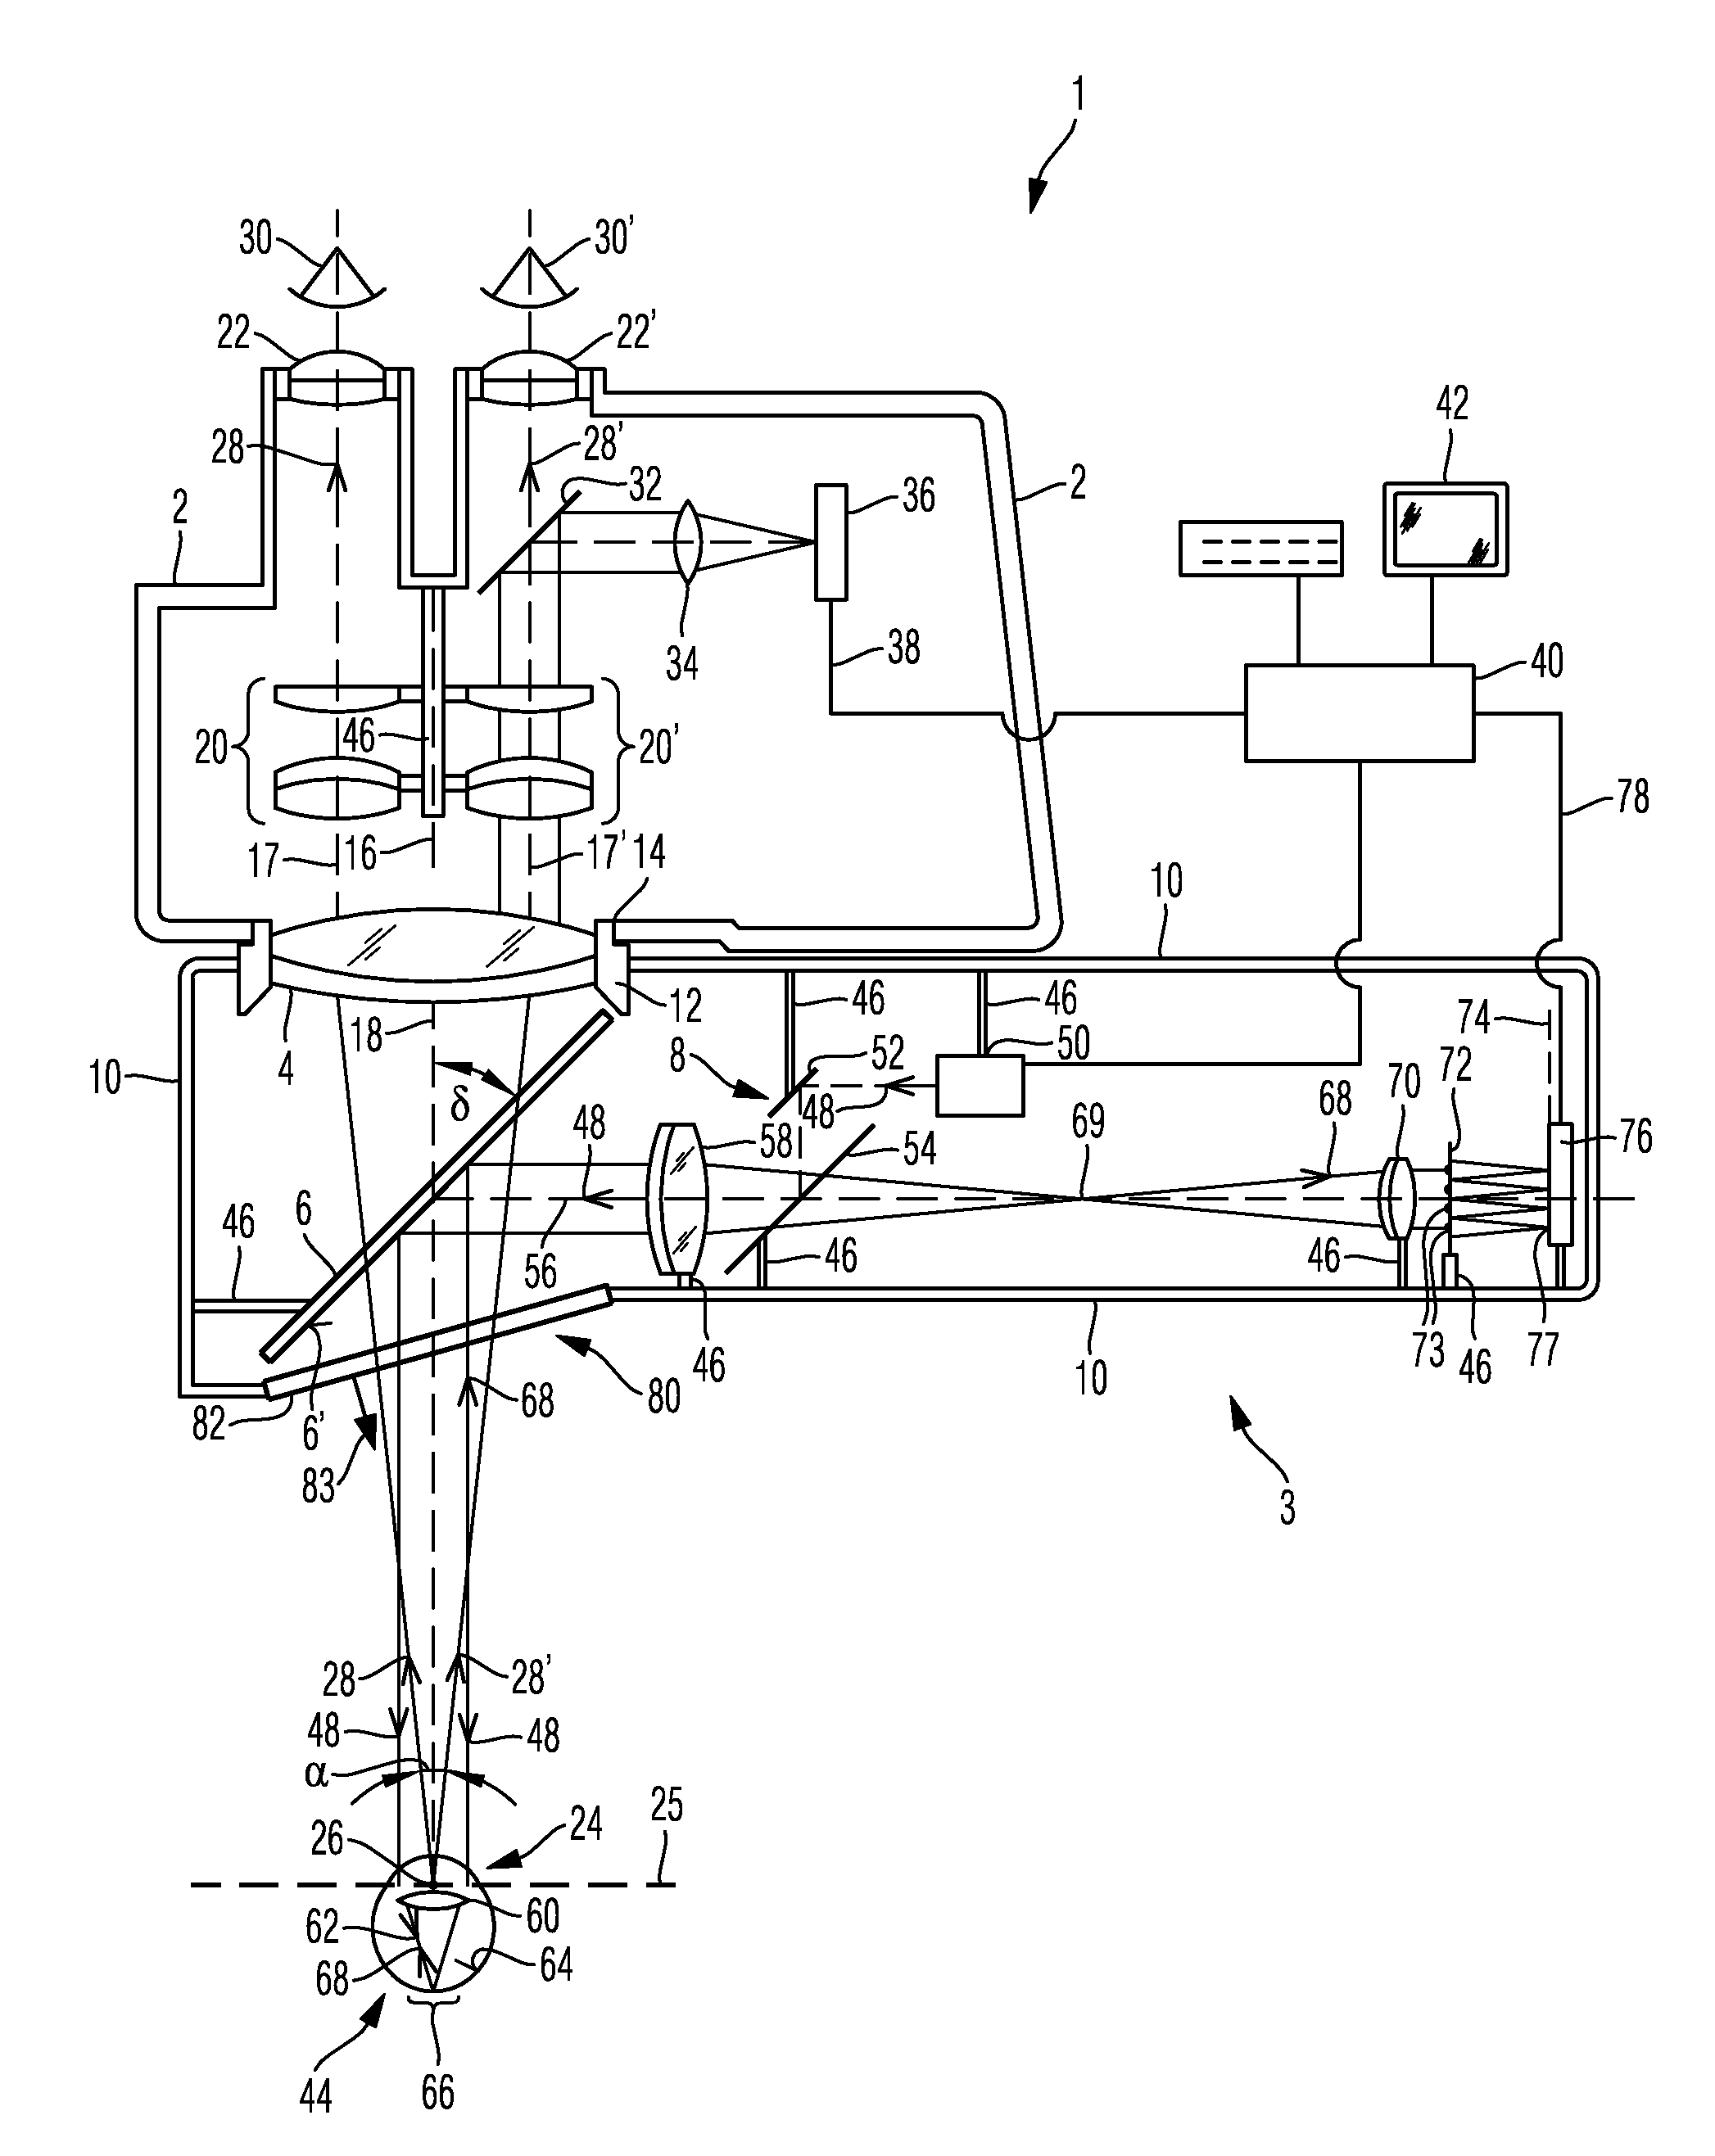 System for wavefront analysis and optical system having a microscope and a system for wavefront analysis